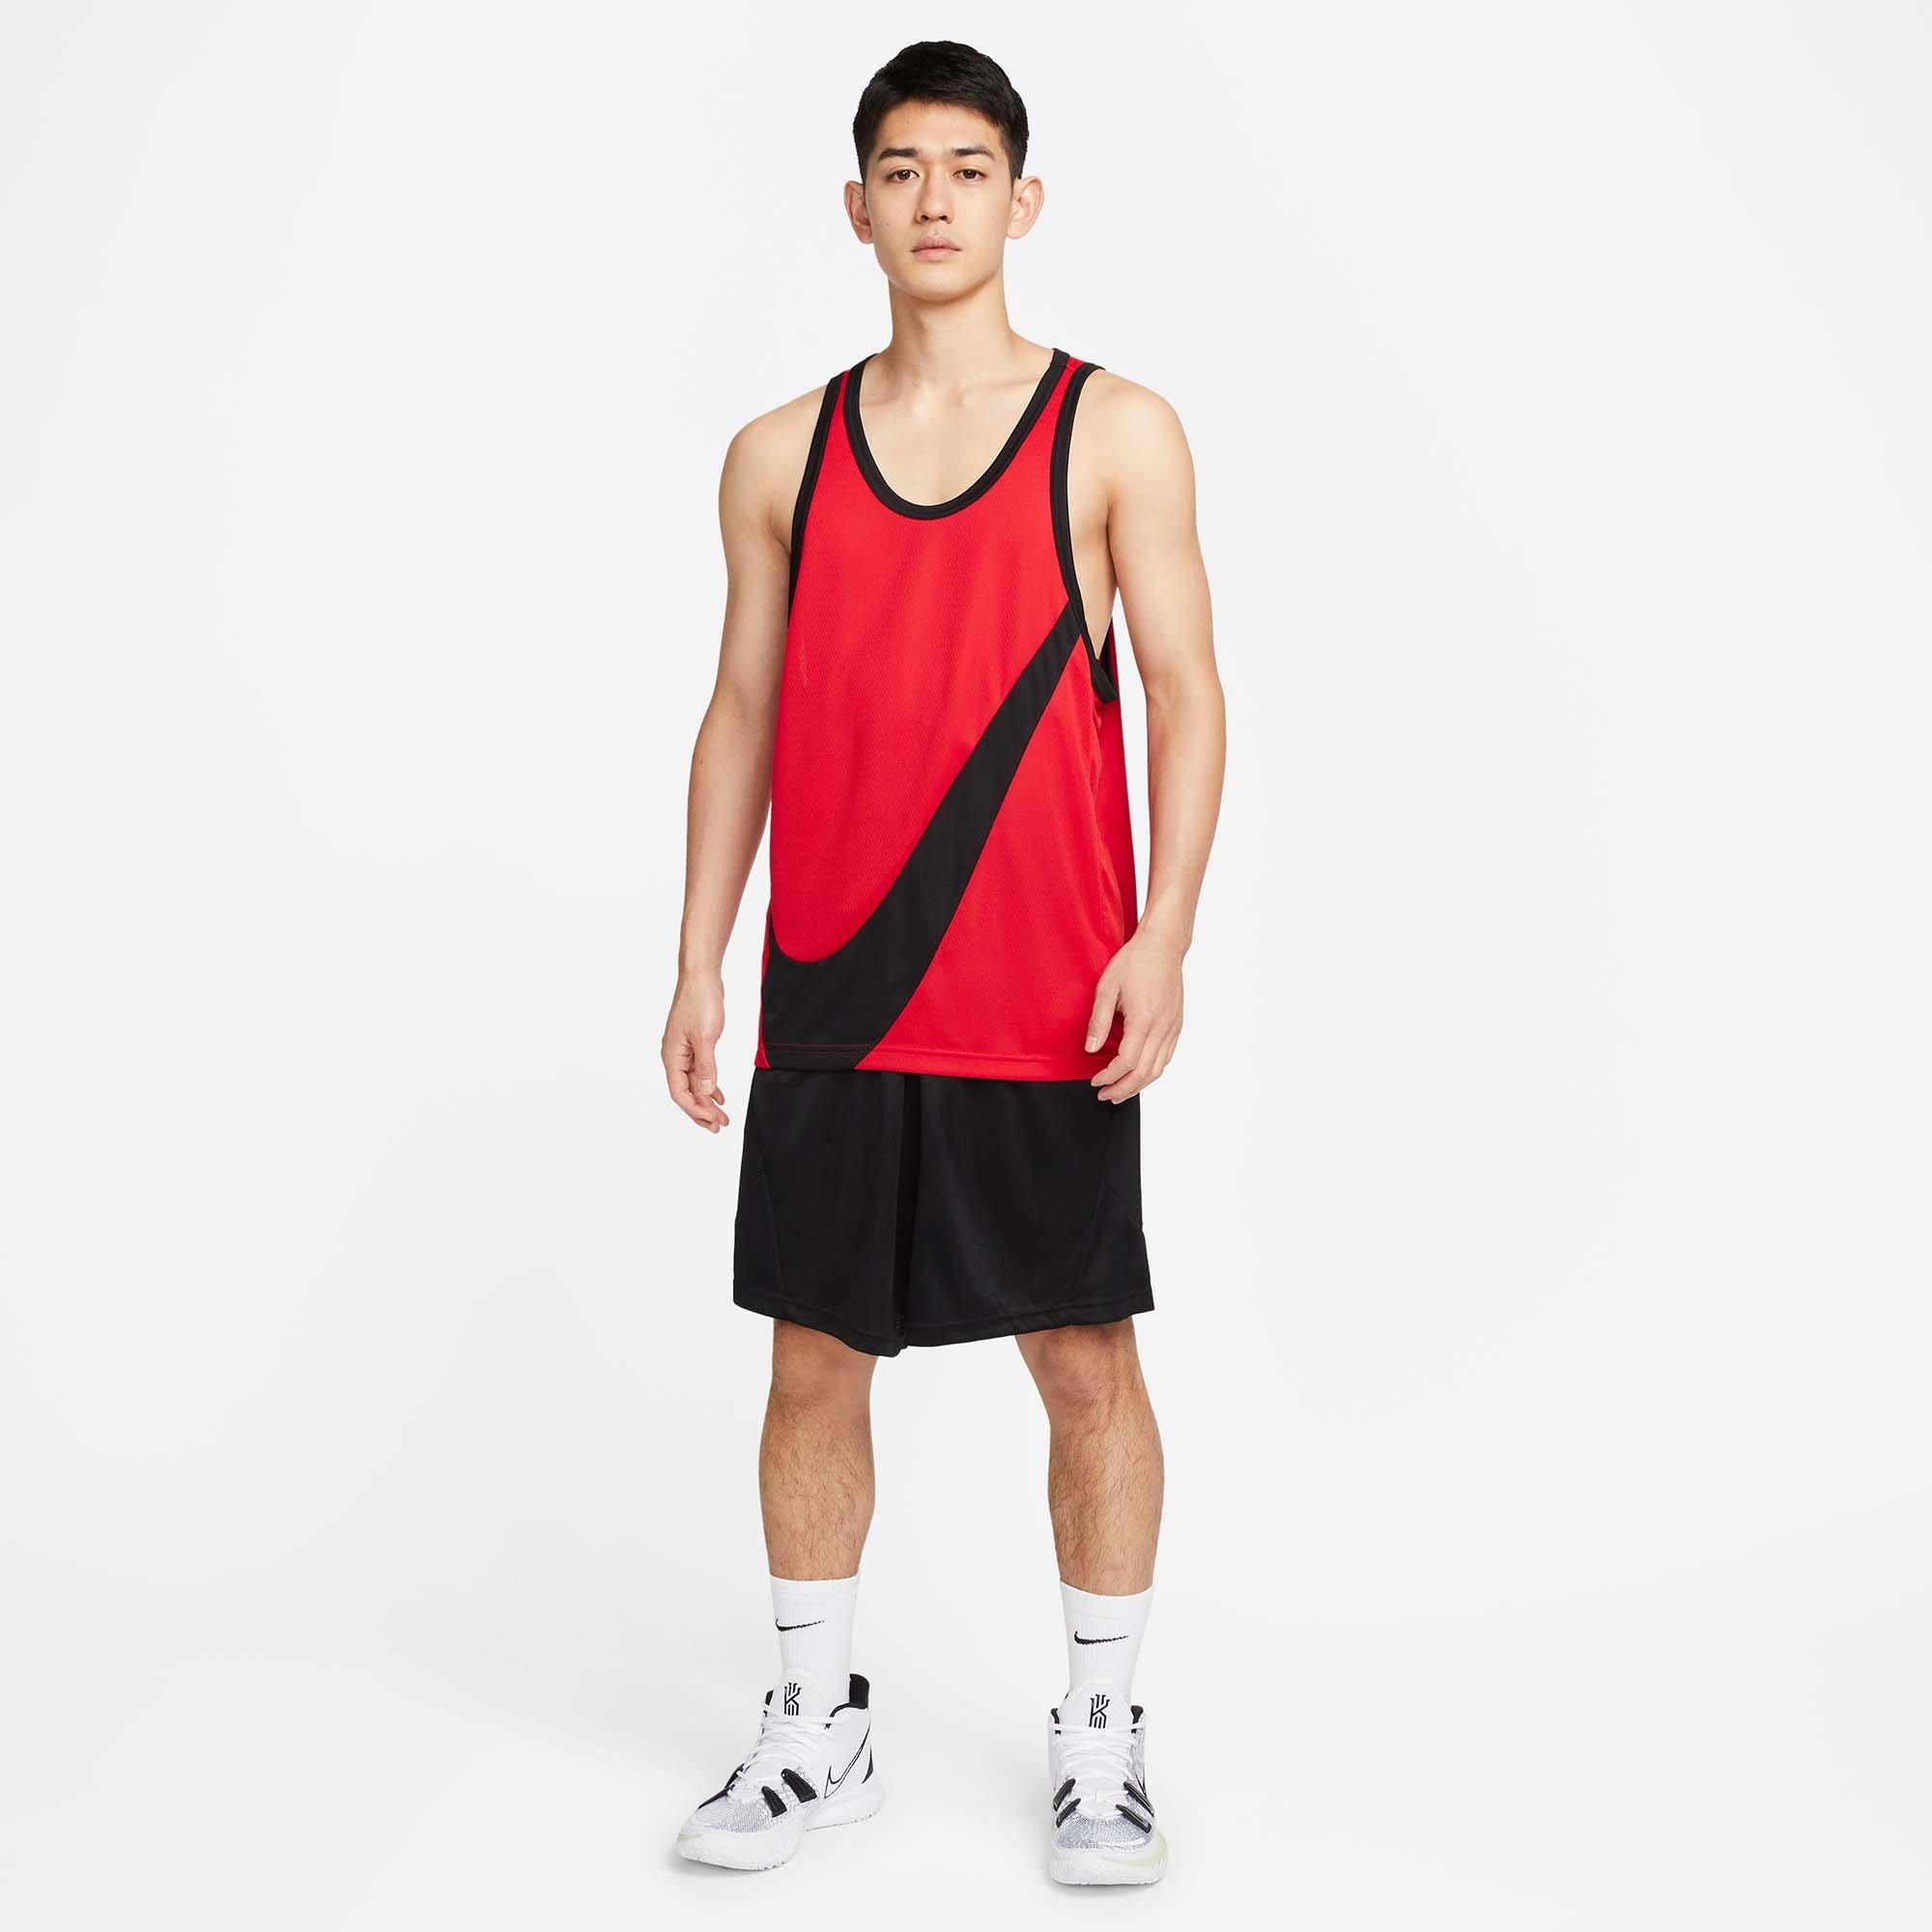 Nike | Dri FIT Crossover Mens Basketball Jersey | Performance Vests ...